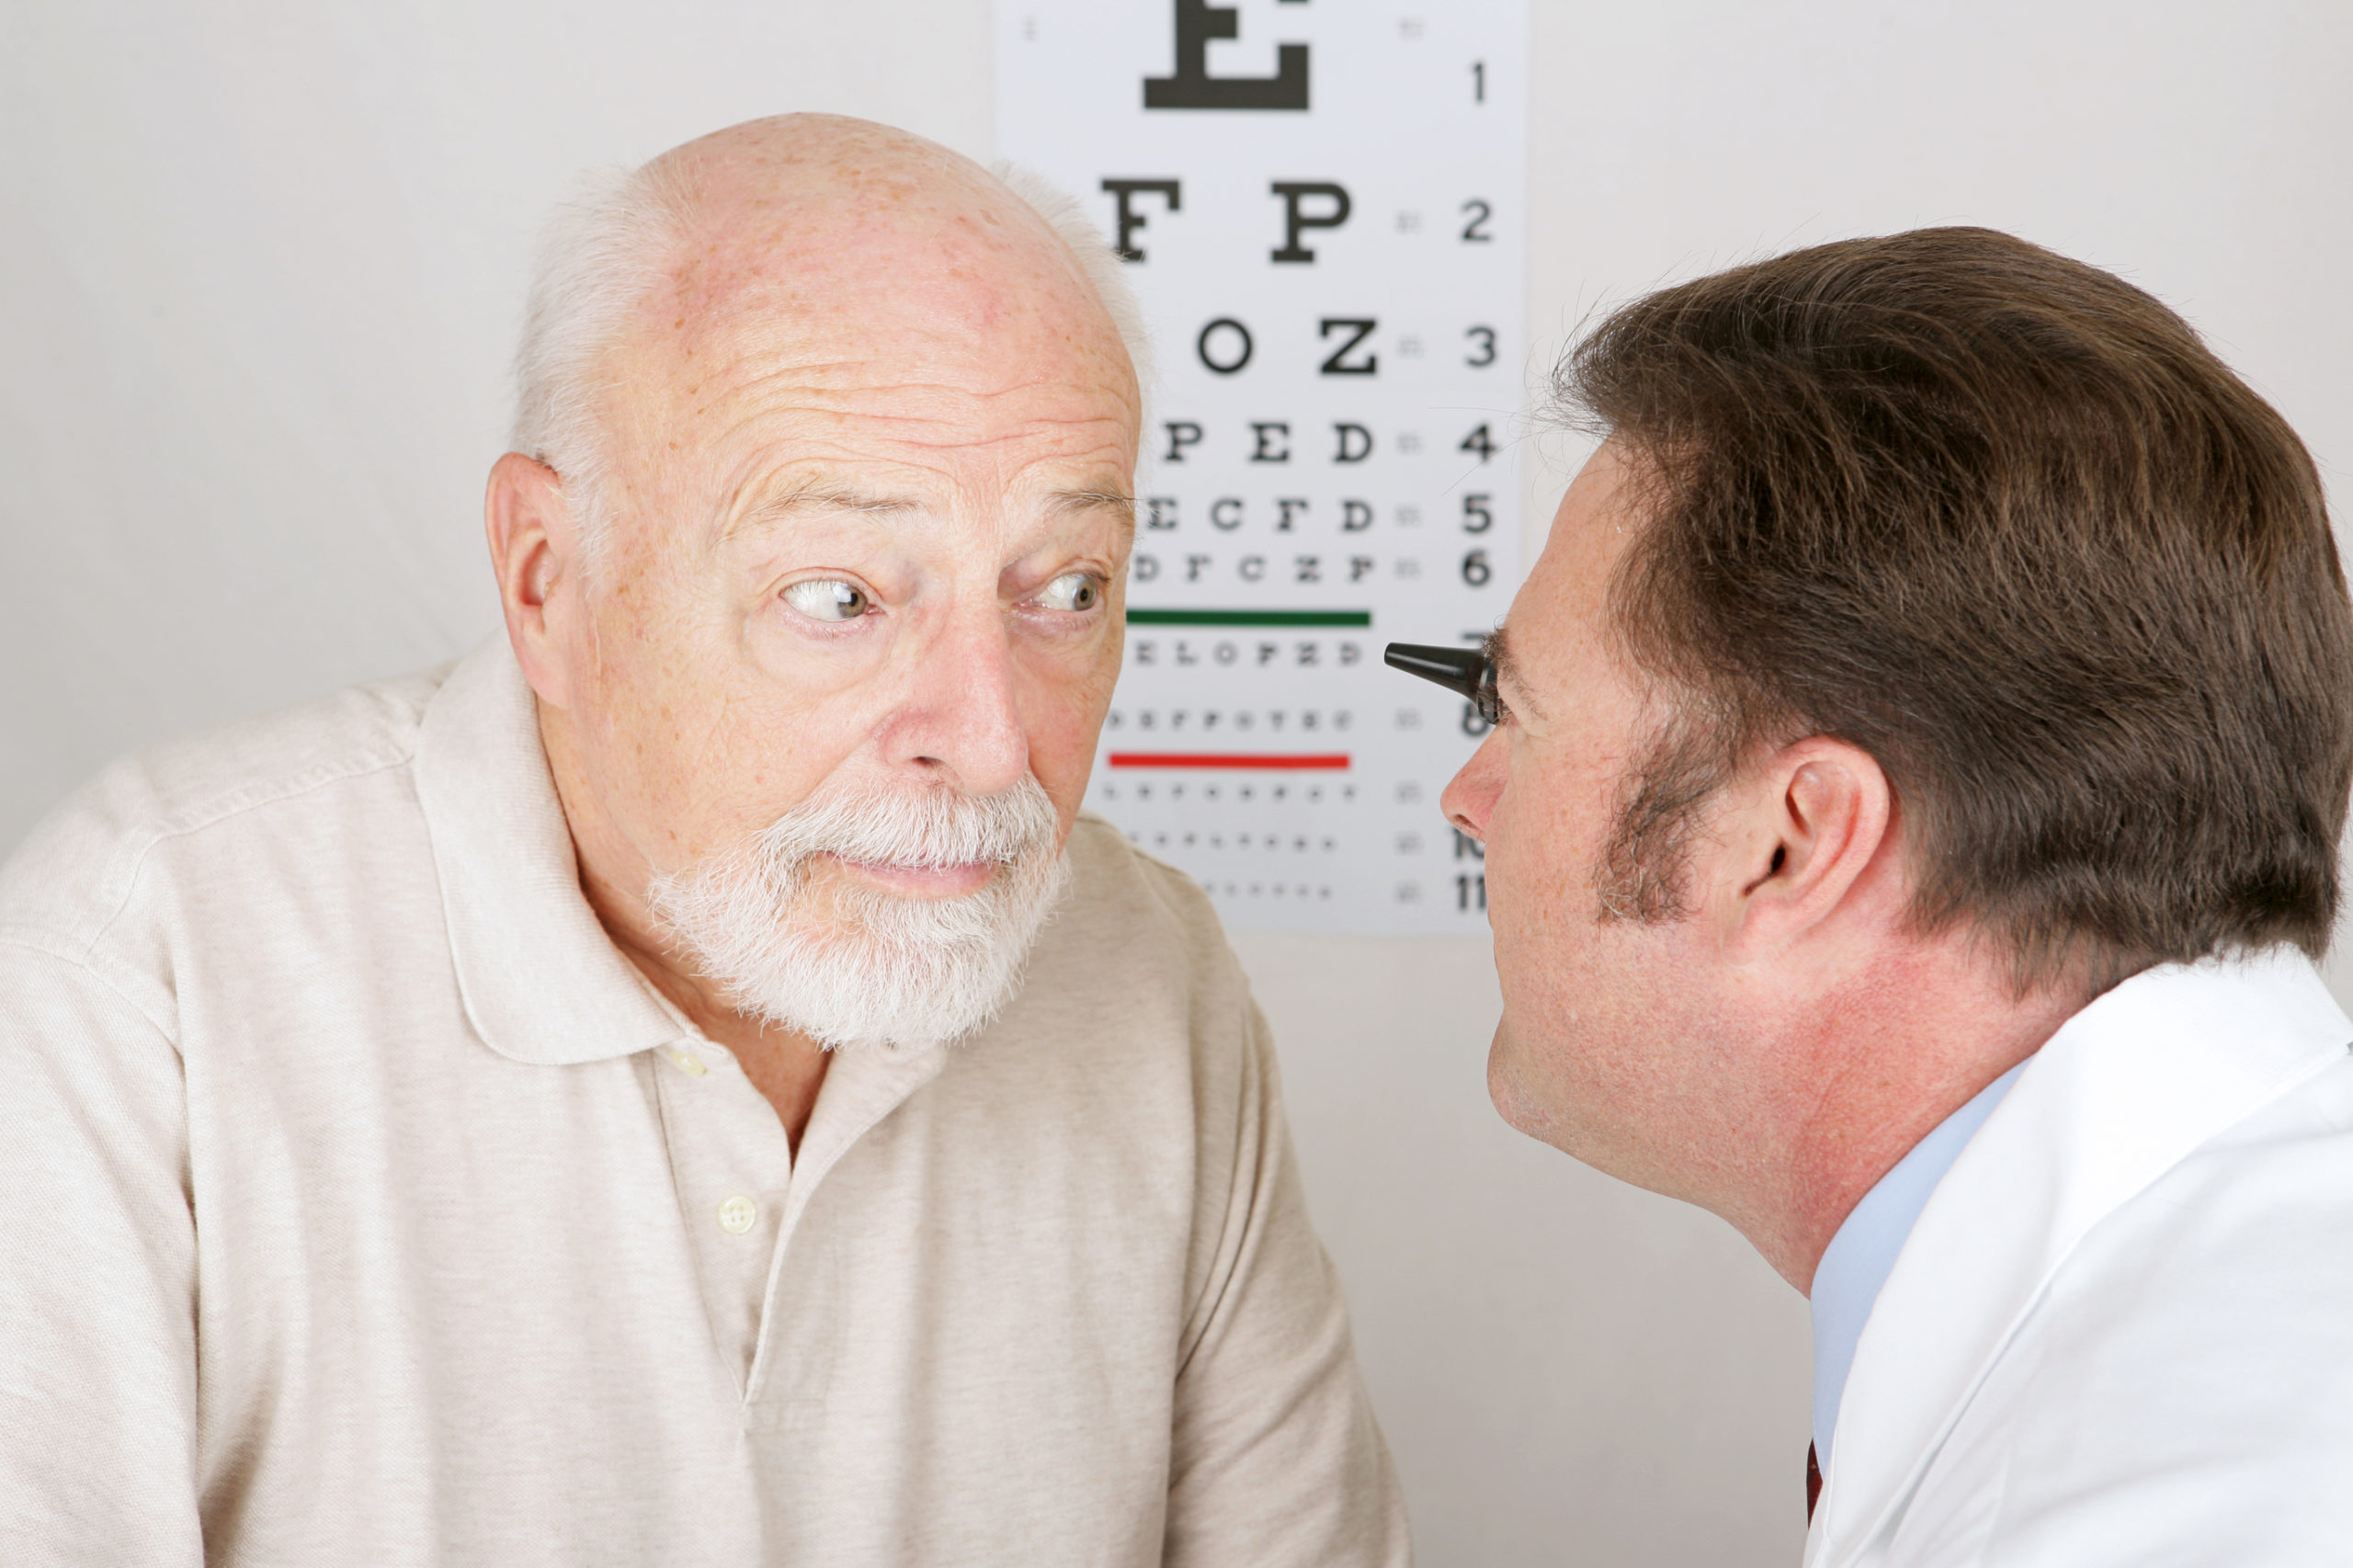 eye doctor examining patient's eye up close